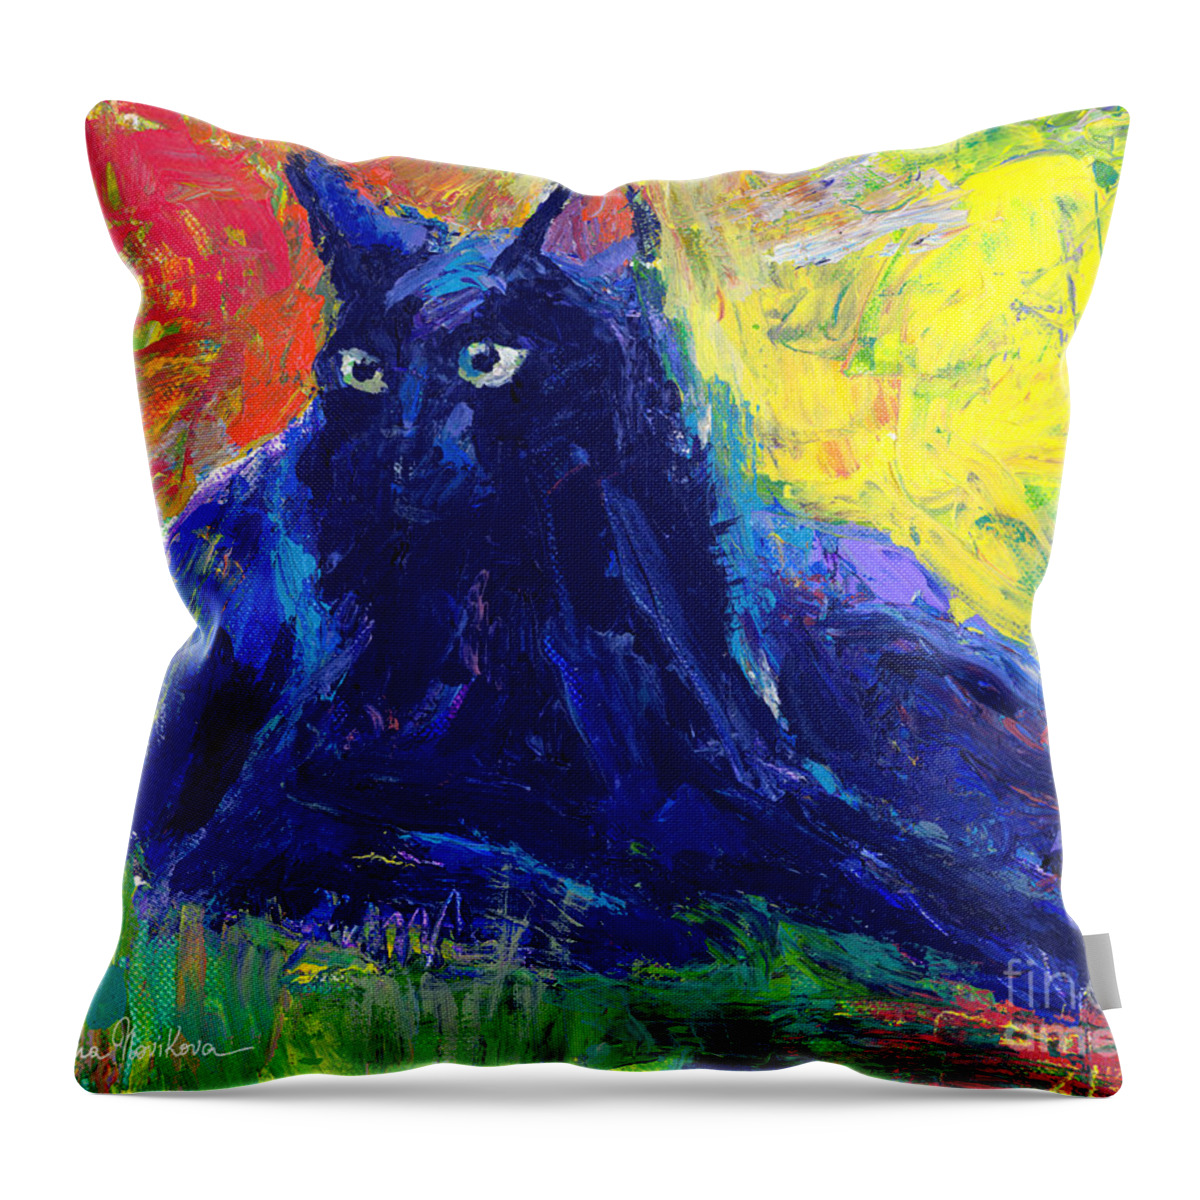 Black Cat Painting Throw Pillow featuring the painting Impasto Black Cat painting by Svetlana Novikova